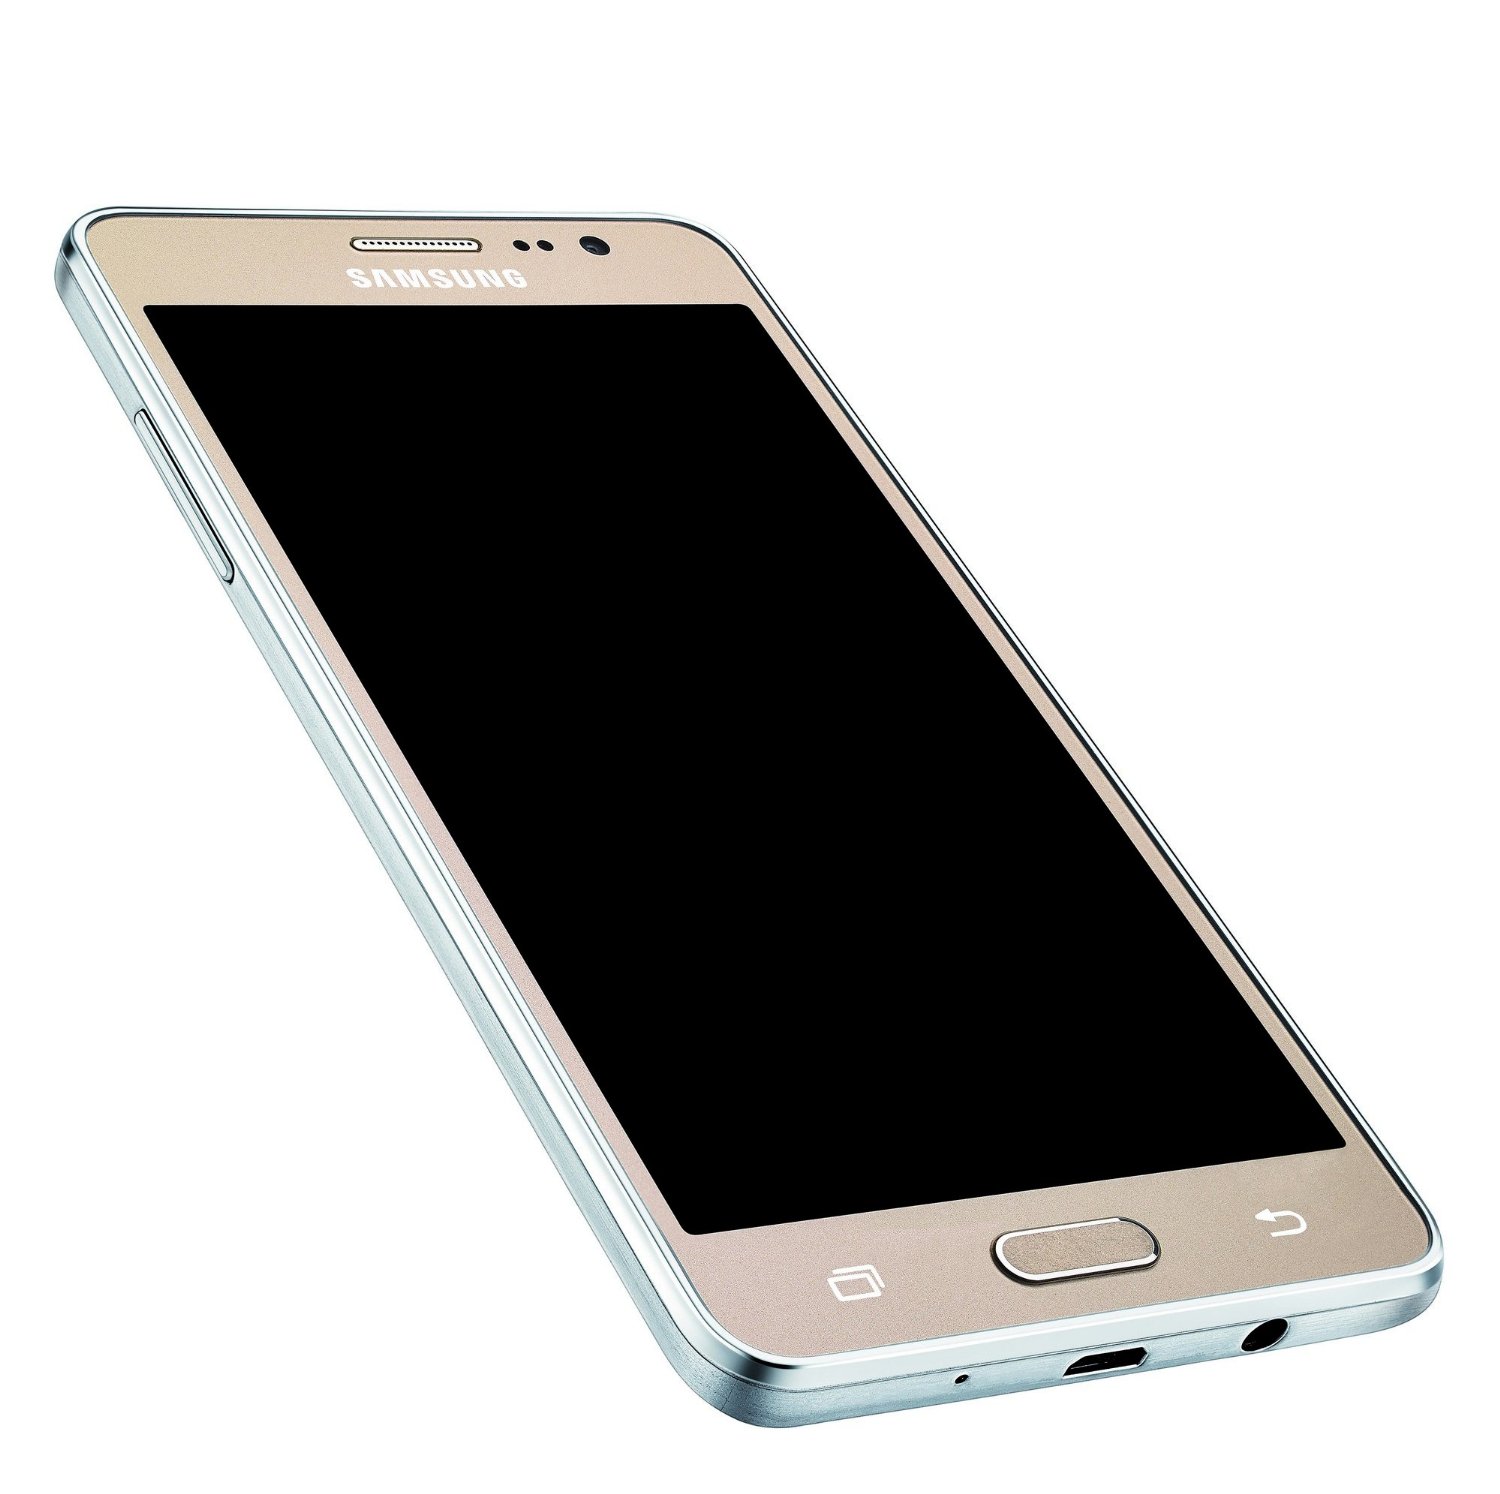 Samsung Galaxy On7 Pro Image - Samsung Pro 7 , HD Wallpaper & Backgrounds